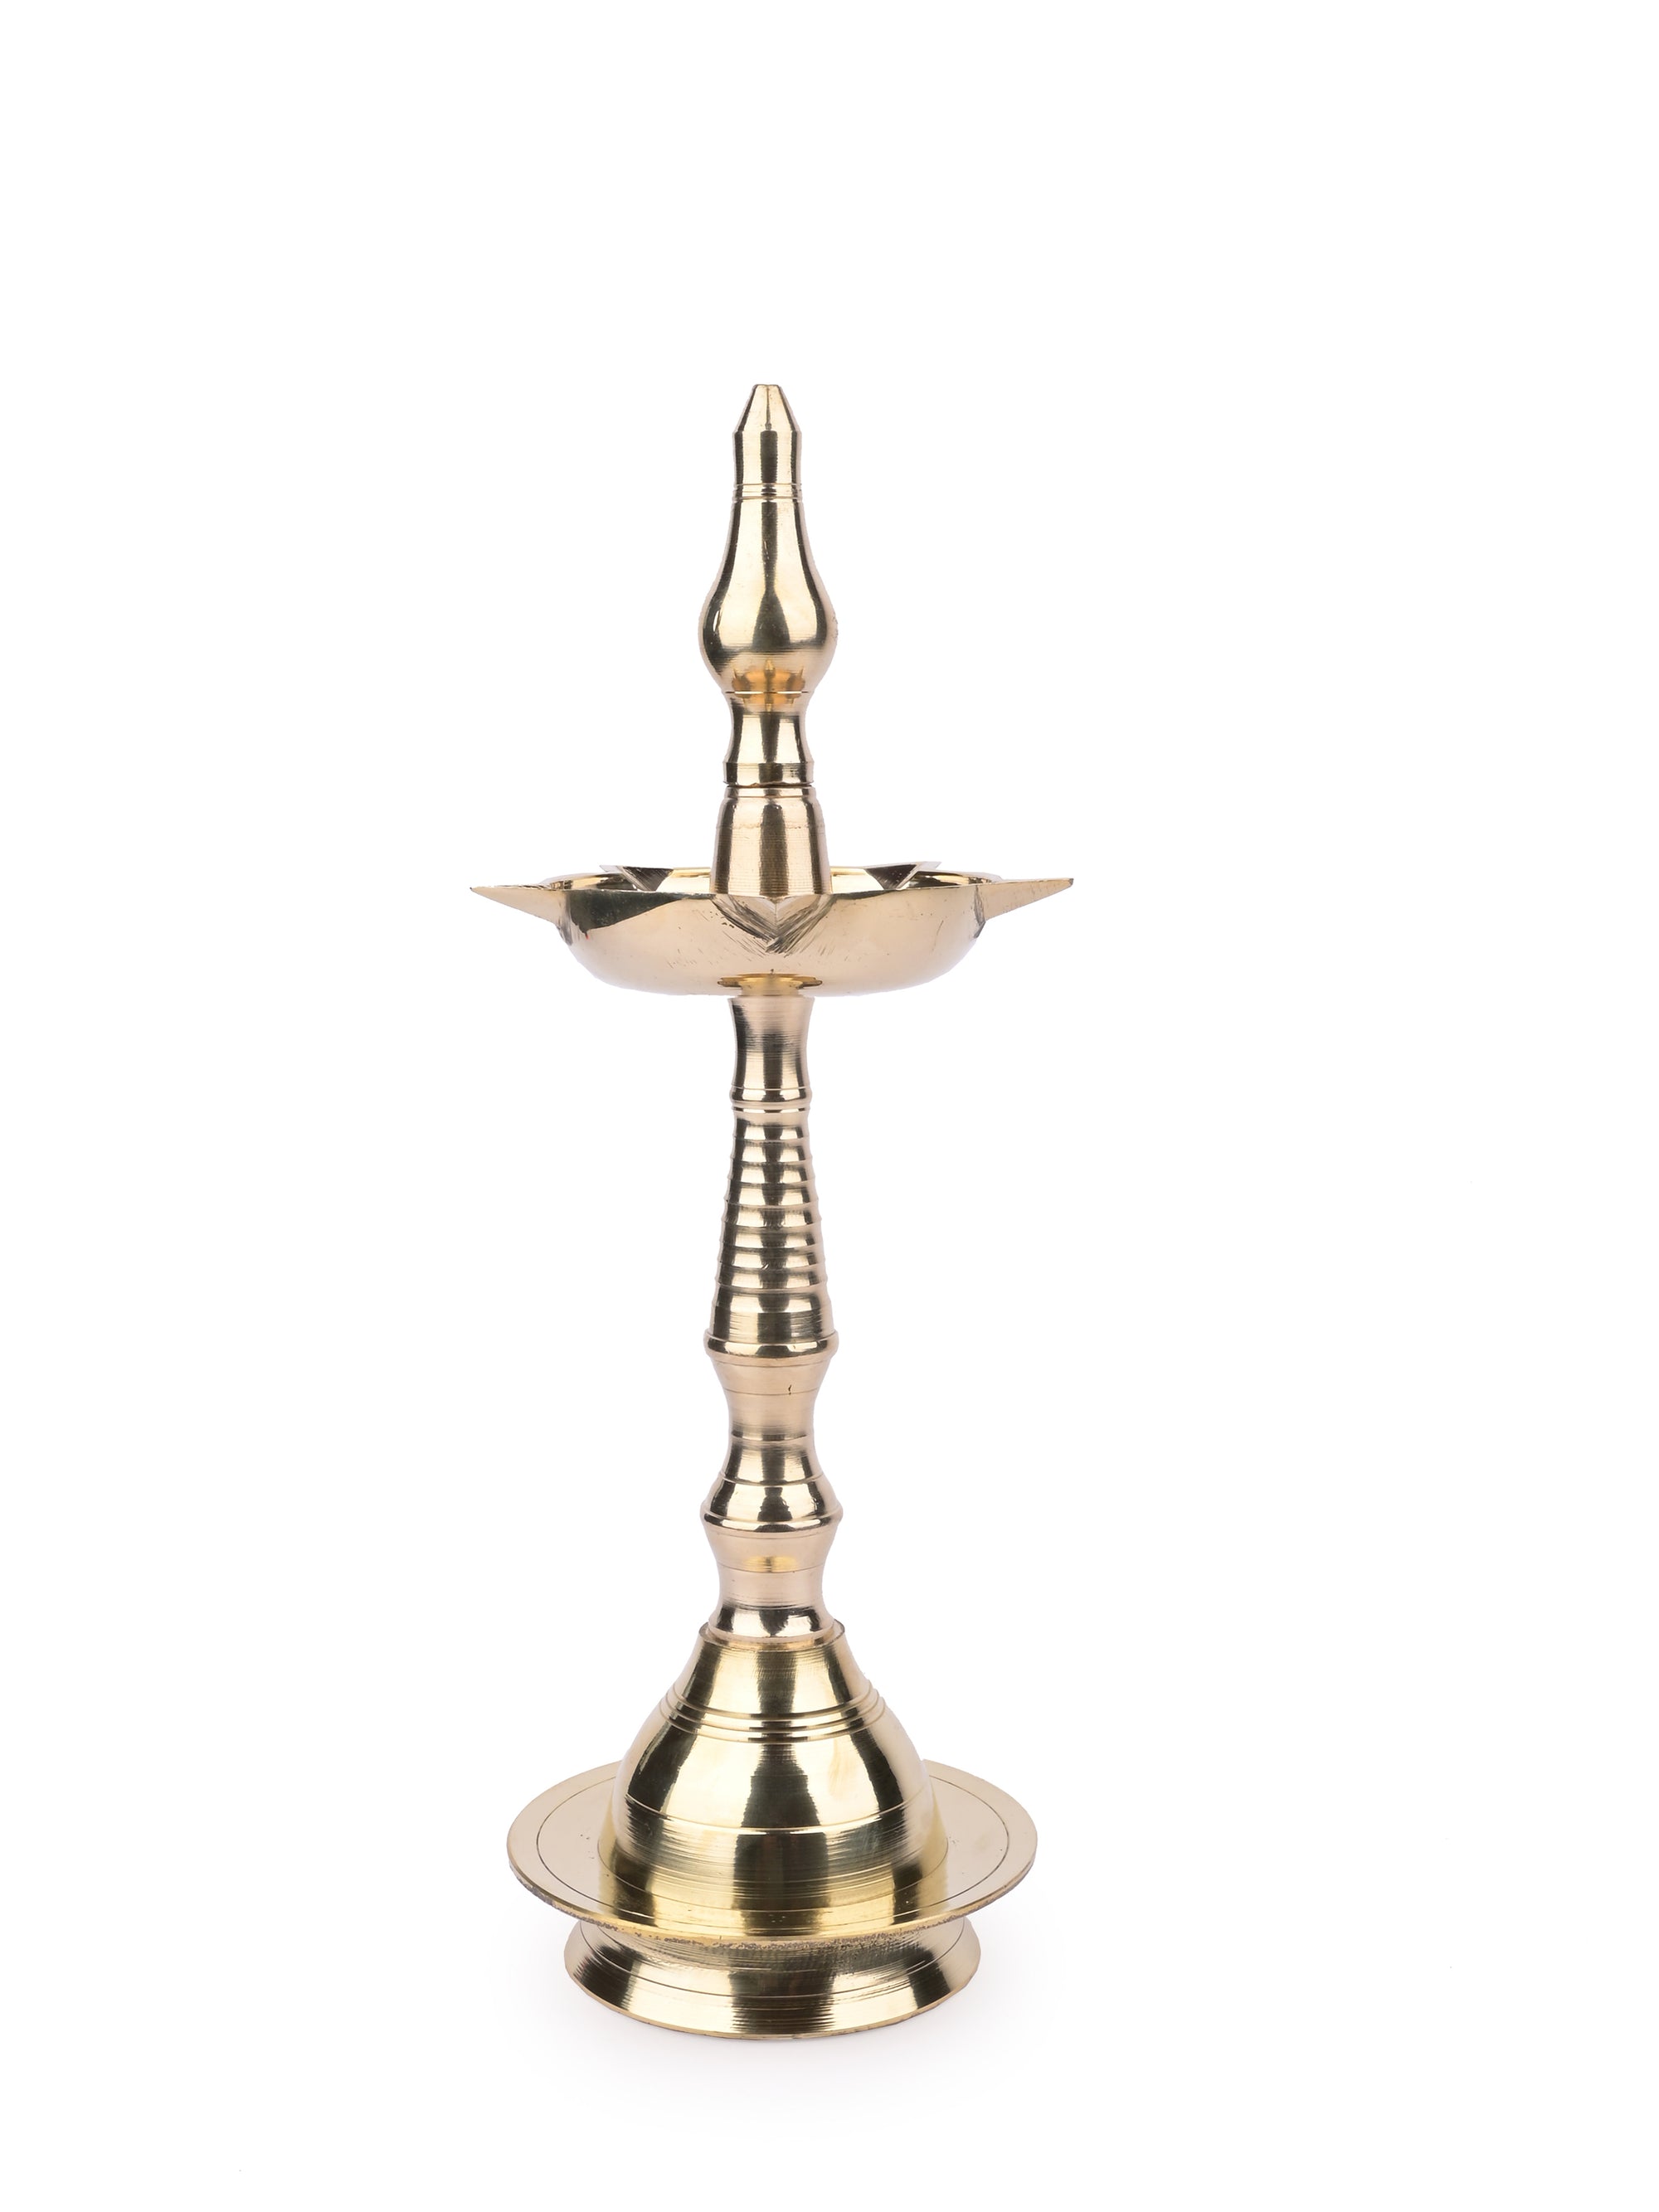 Traditional Brass Diya / Oil Lamp stand for Home and Temple - 12 inches in height - The Heritage Artifacts